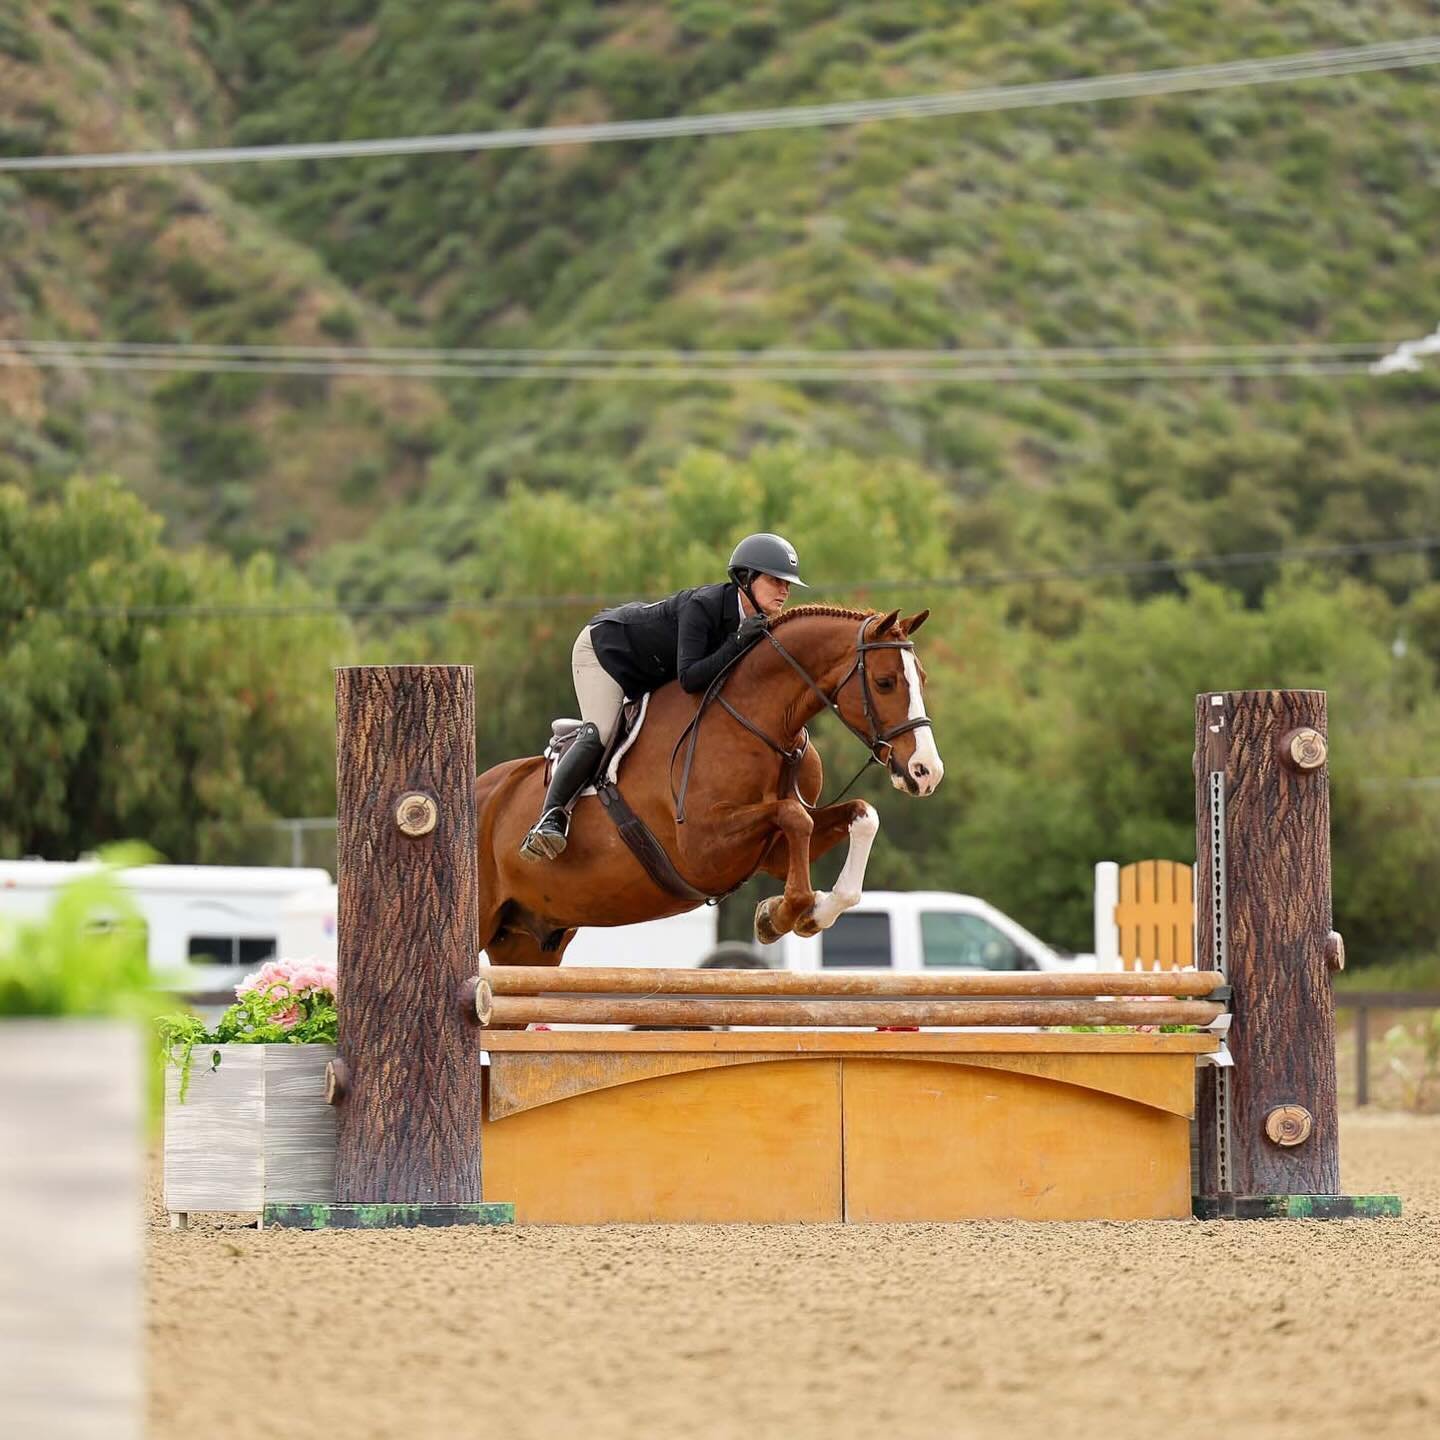 Cheroshi, owned by Chrissy Phillips, put in some beautiful rounds last week to claim the Championship in the USHJA 3&rsquo; Division under the guidance of @rebeccabruce87 🏆🥇

#Sunnybrook #SB #JumpNEE #Jumpers #Hunters #Eq #Ponies